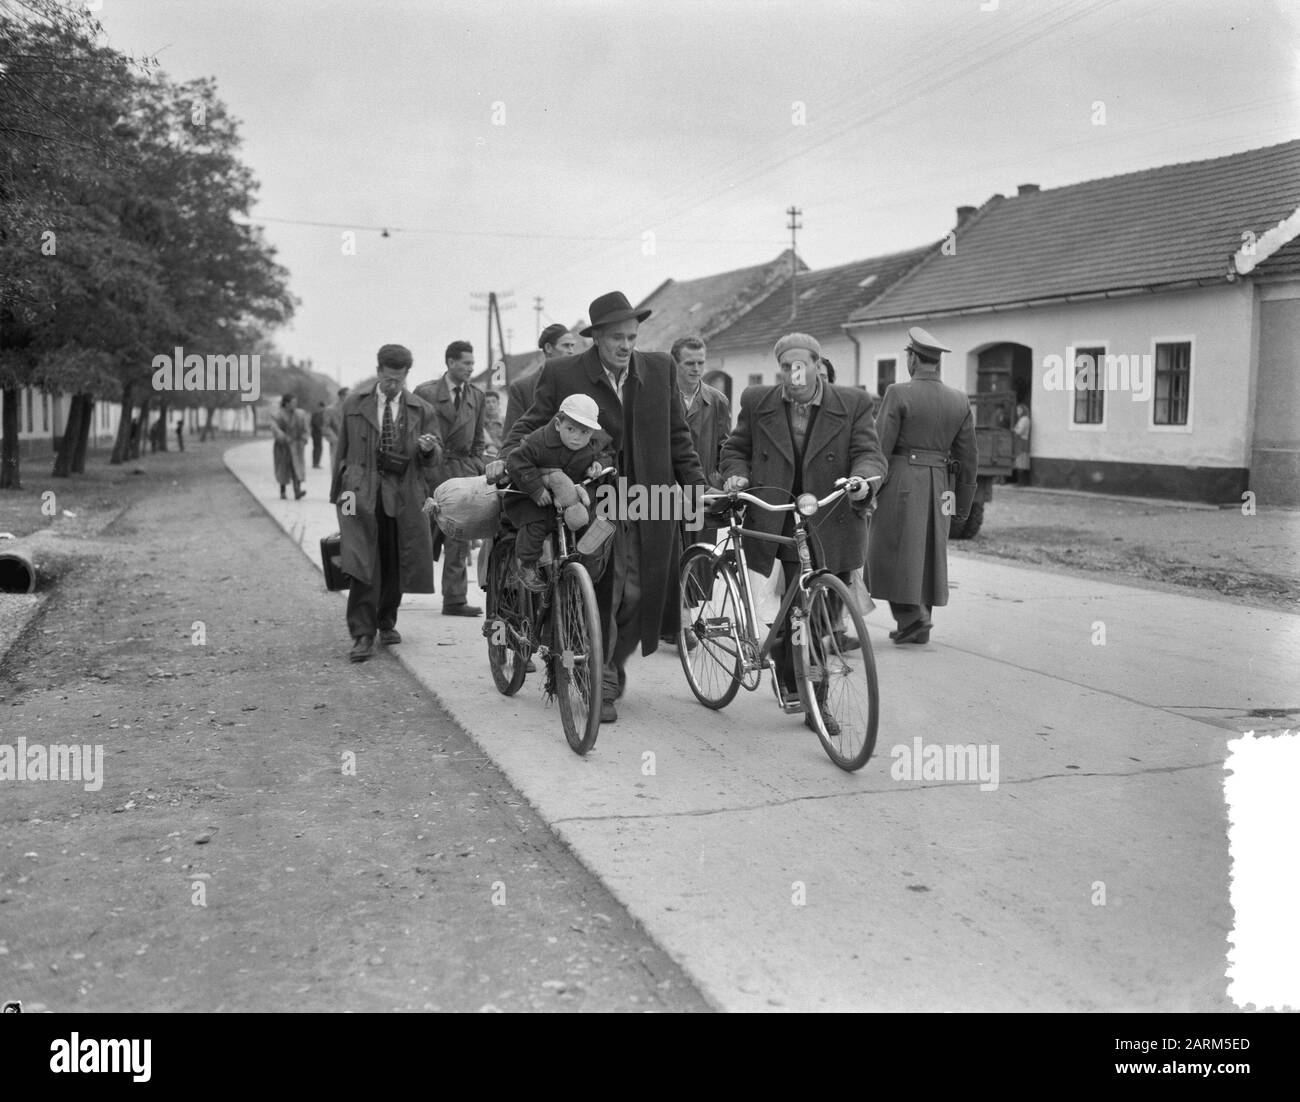 Groups with bicycles and children Date: October 31, 1956 Location: Nickelsdorf Keywords: BIKLES, GROUPS, Children Stock Photo